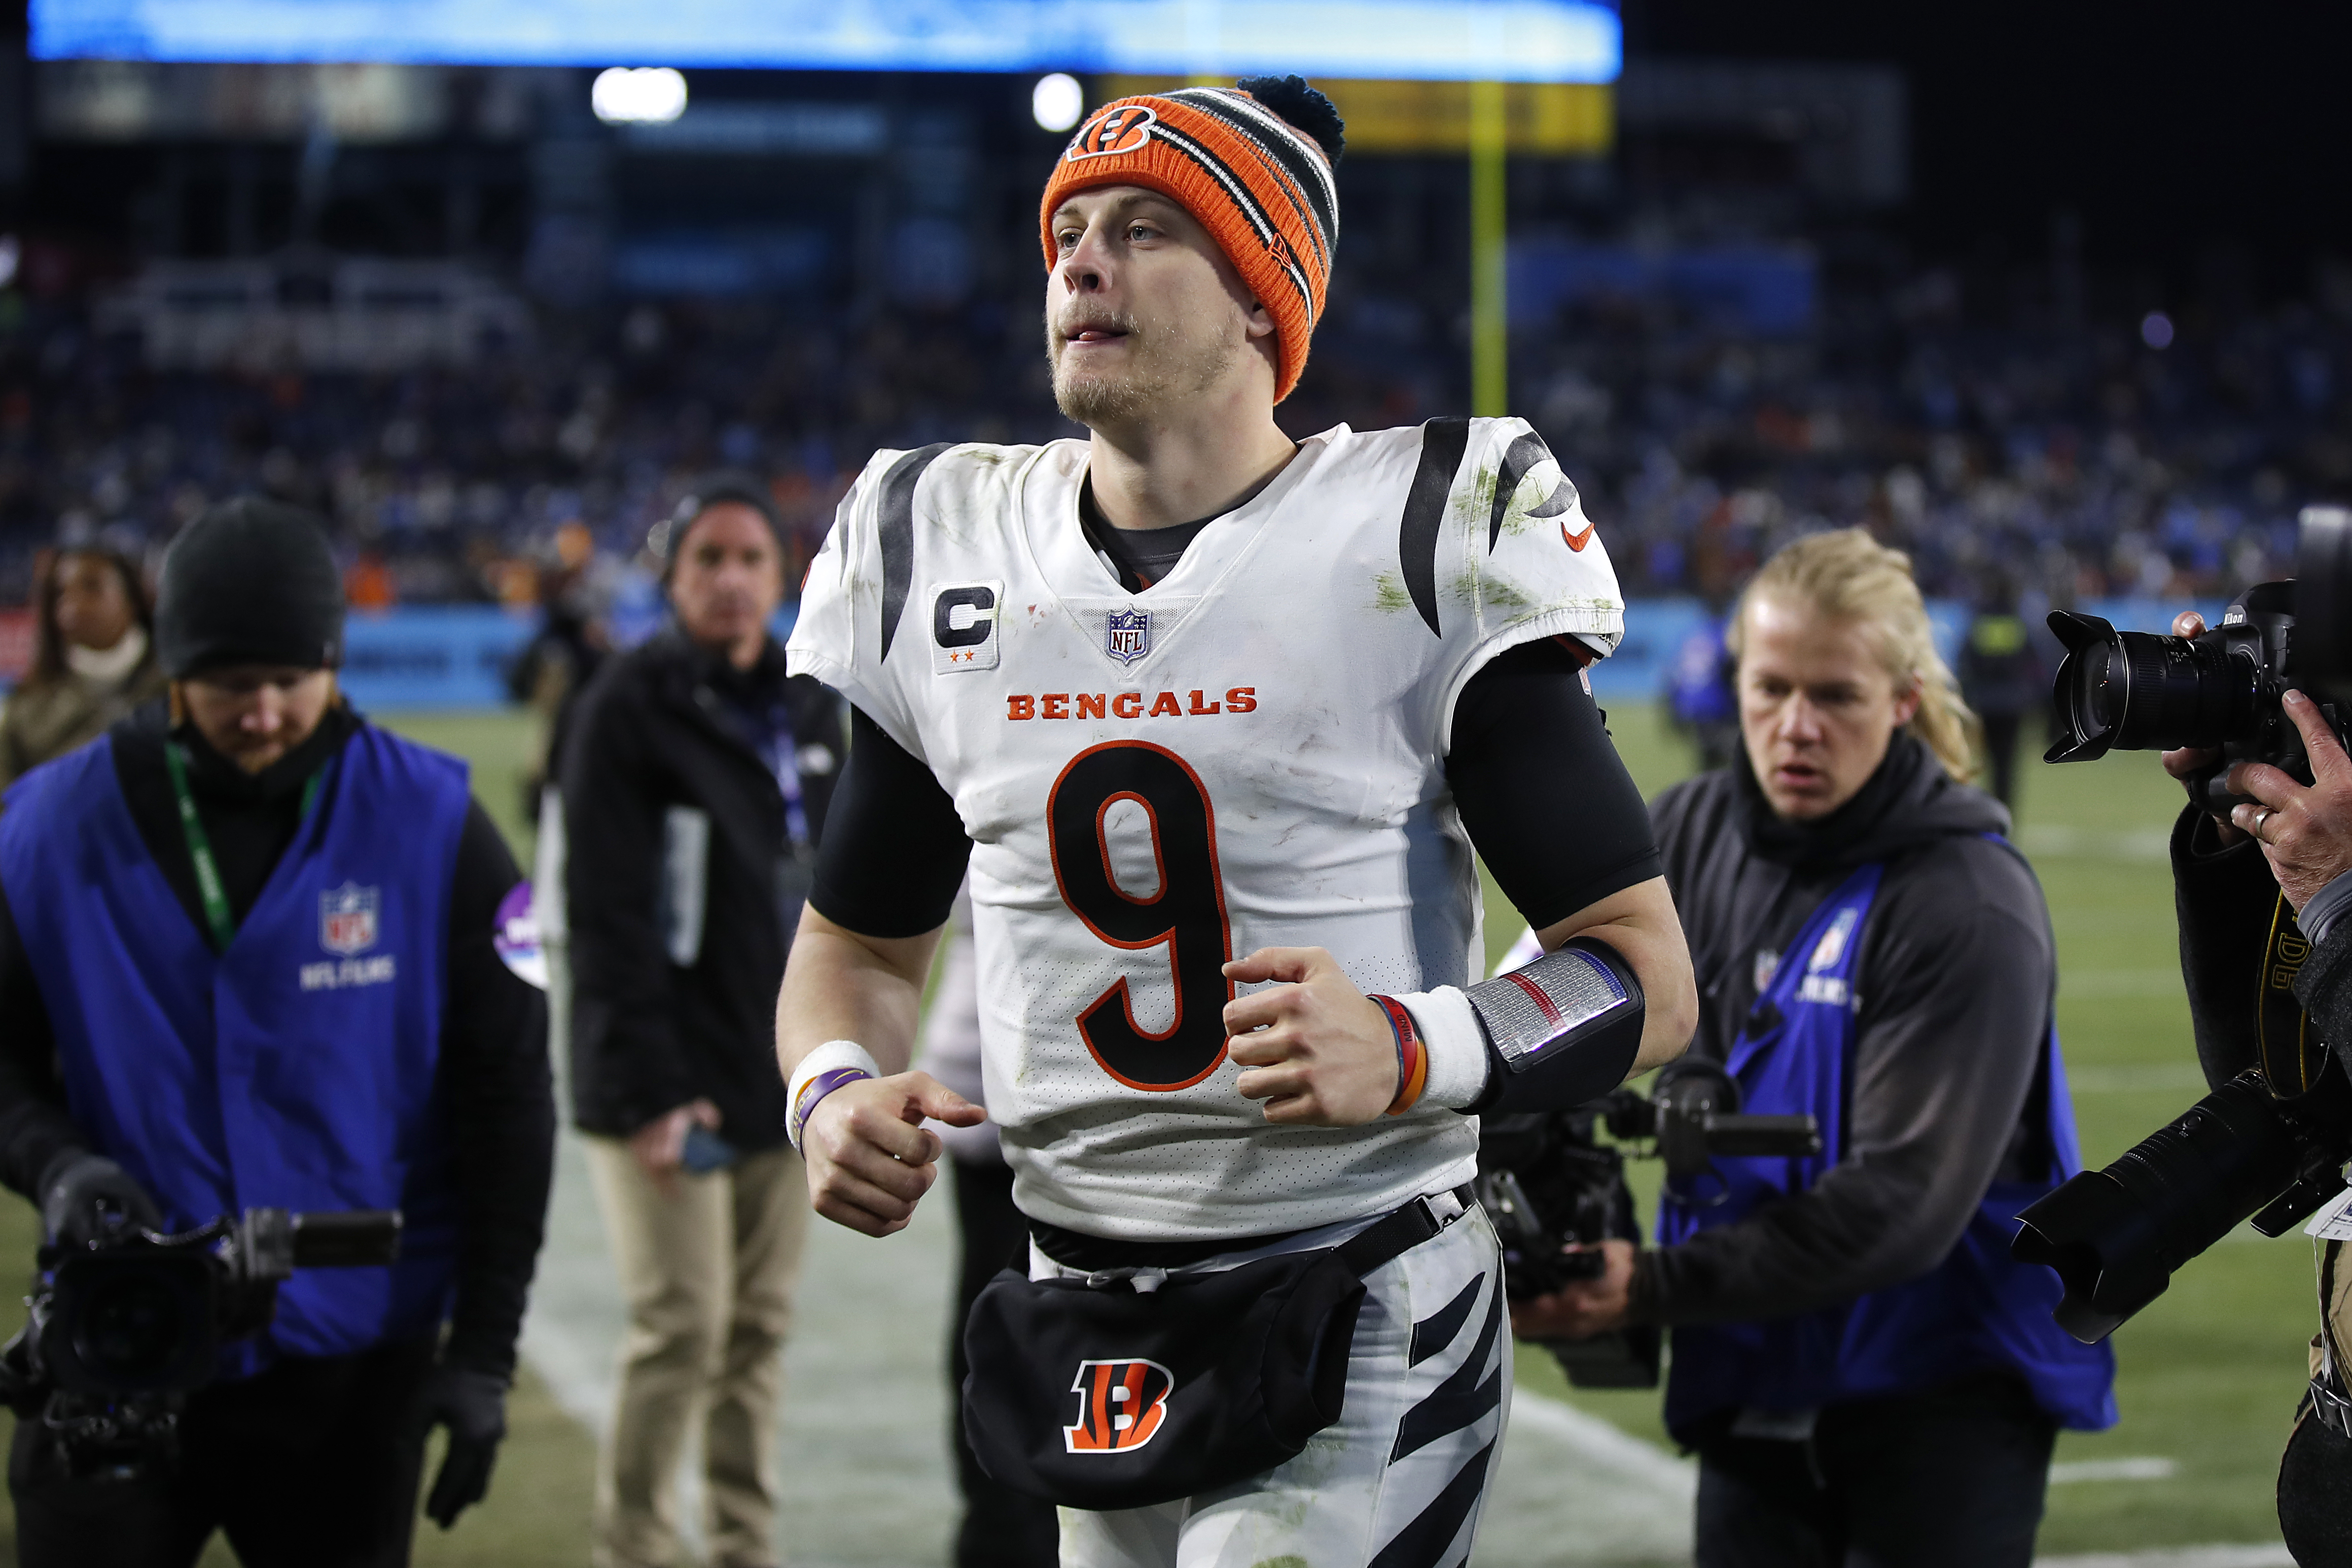 Quarterback Joe Burrow #9 of the Cincinnati Bengals runs off the field following the Bengals 19-16 win over the Tennessee Titans in the AFC Divisional Playoff game at Nissan Stadium on January 22, 2022 in Nashville, Tennessee.